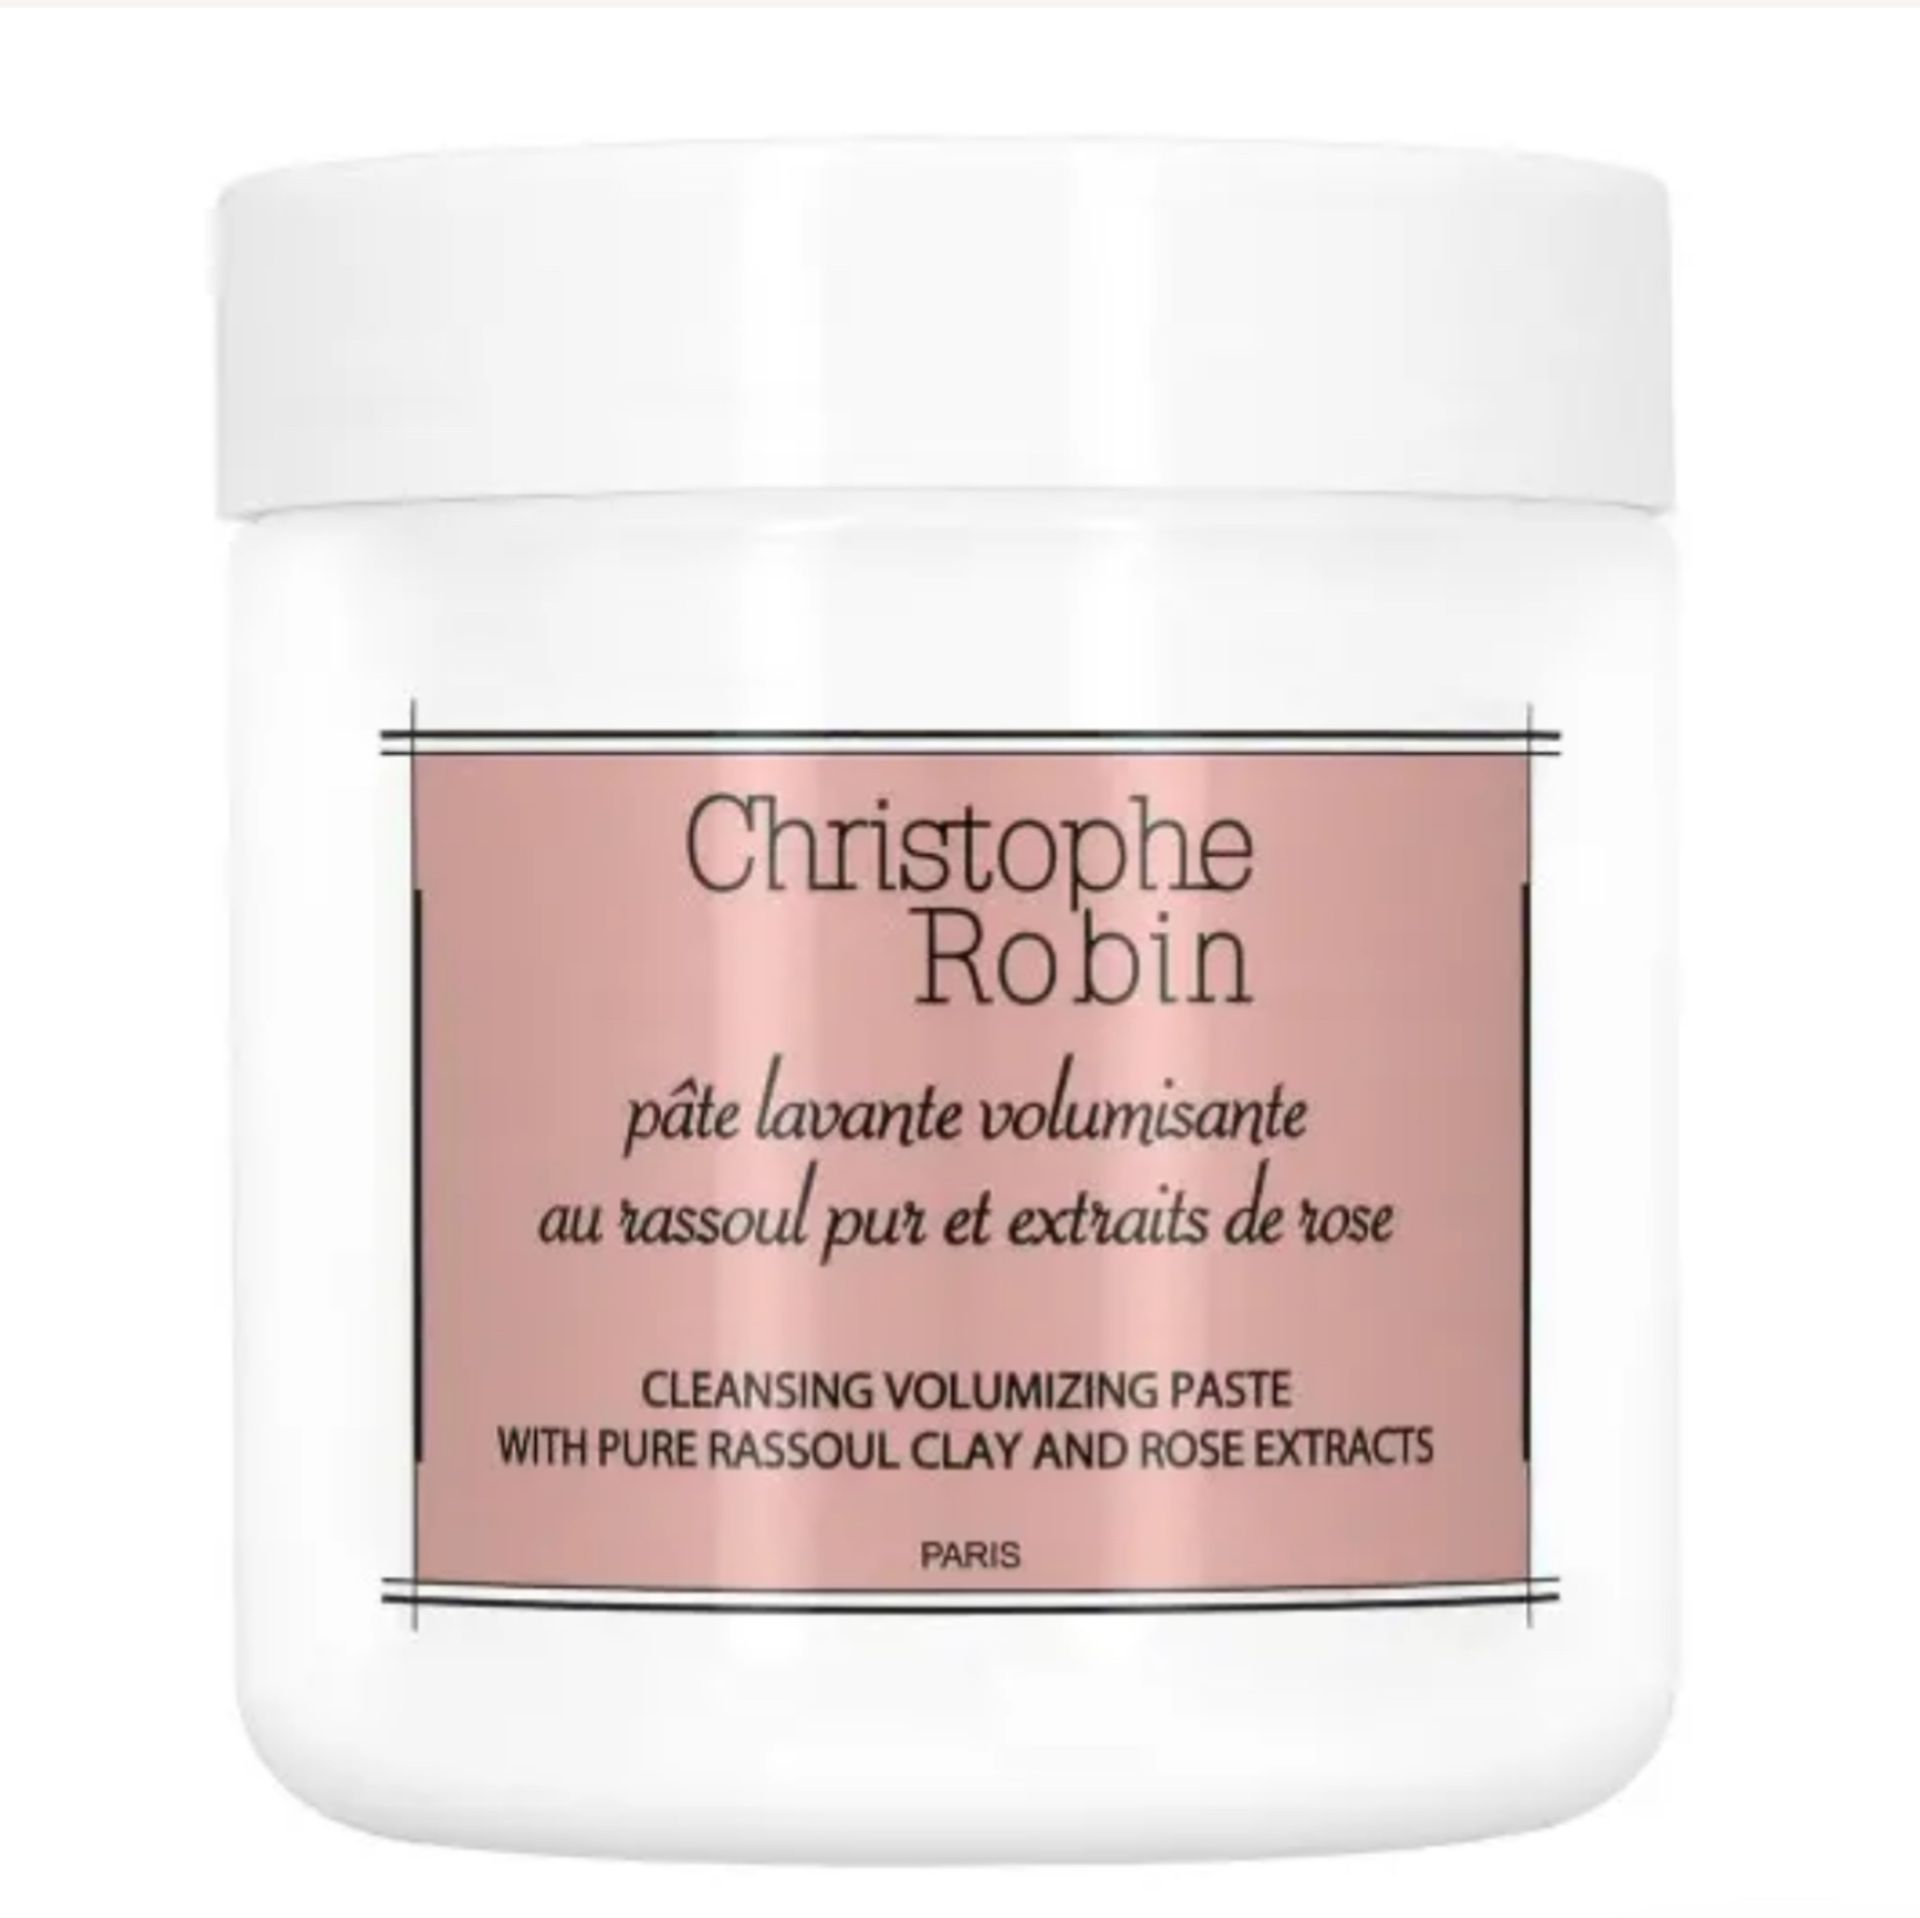 980 X CHRISTOPHE ROBIN CLEANSING VOLUMISING PASTE RASSOUL CLAY AND ROSE EXTRACTS 12ML RRP£2940 - Image 2 of 4